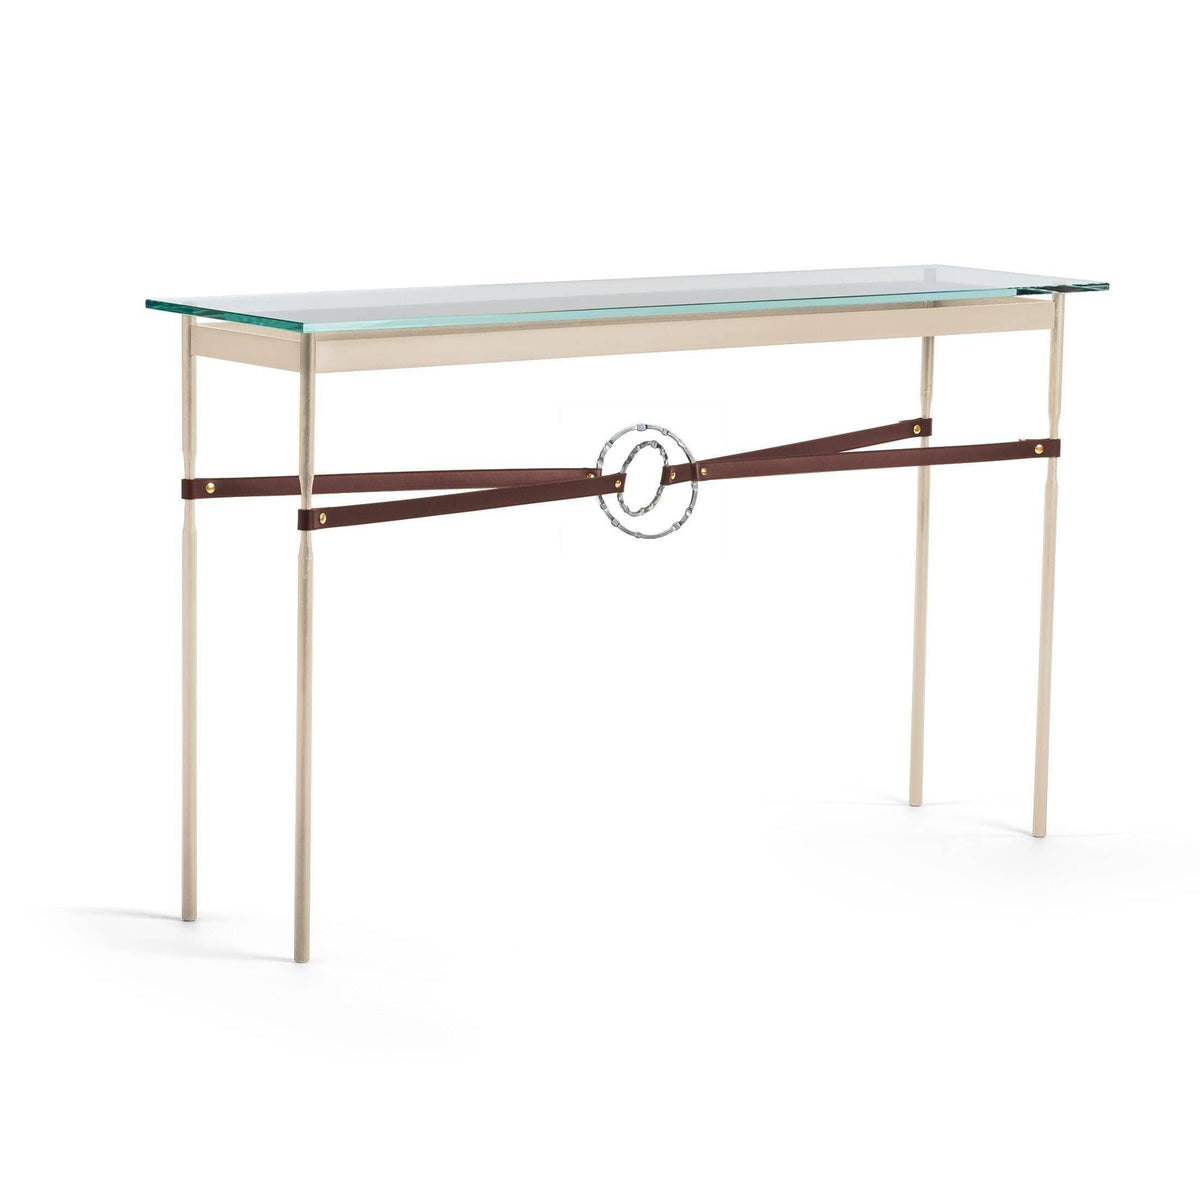 Hubbardton Forge - Equus Brown Leather Console Table - 750118-84-85-LB-VA0714 | Montreal Lighting & Hardware